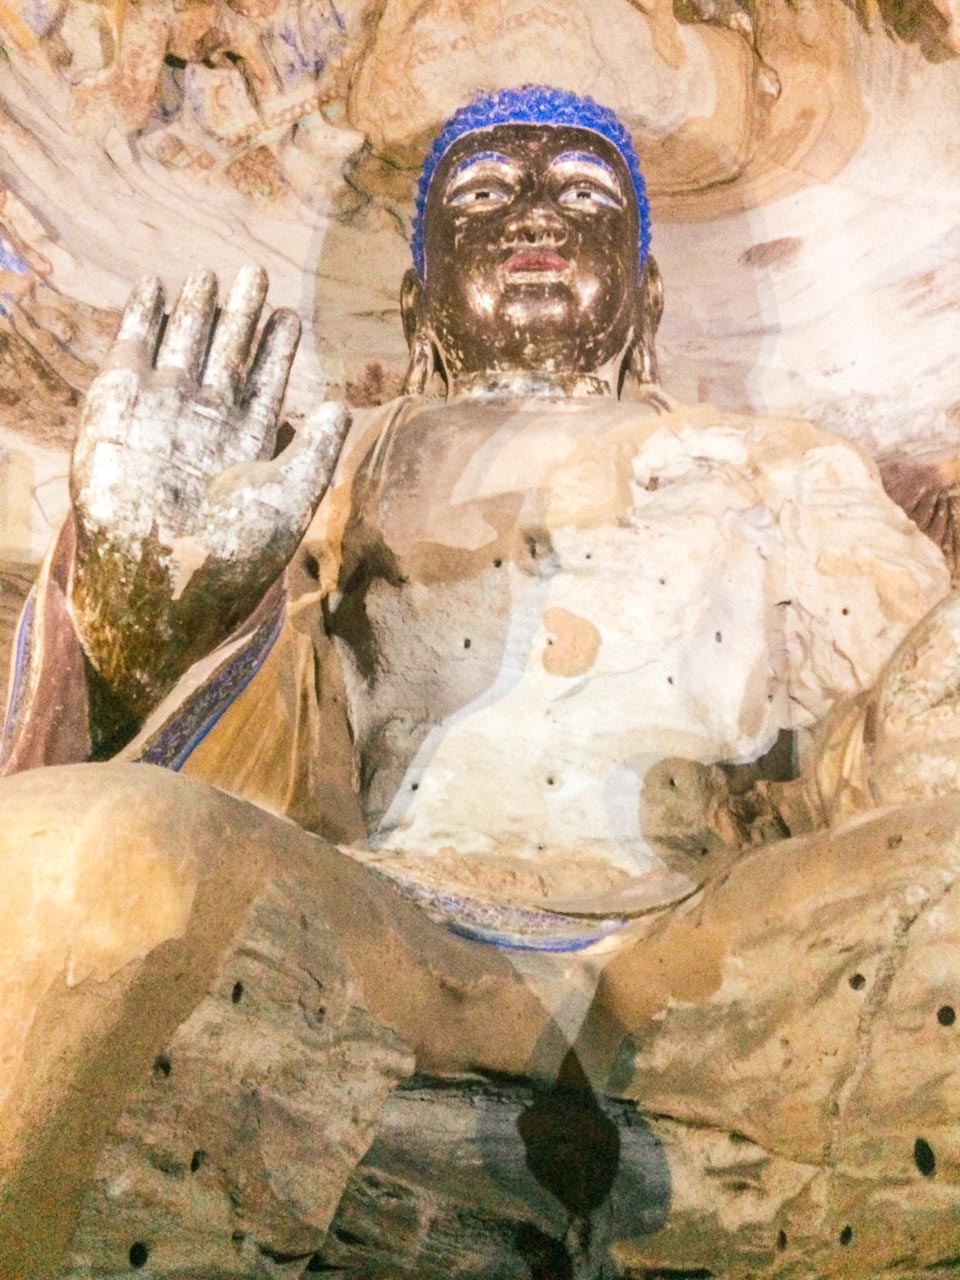 A colourful Buddhist statue carved inside a cave at the Yungang Grottoes in Datong, Shanxi